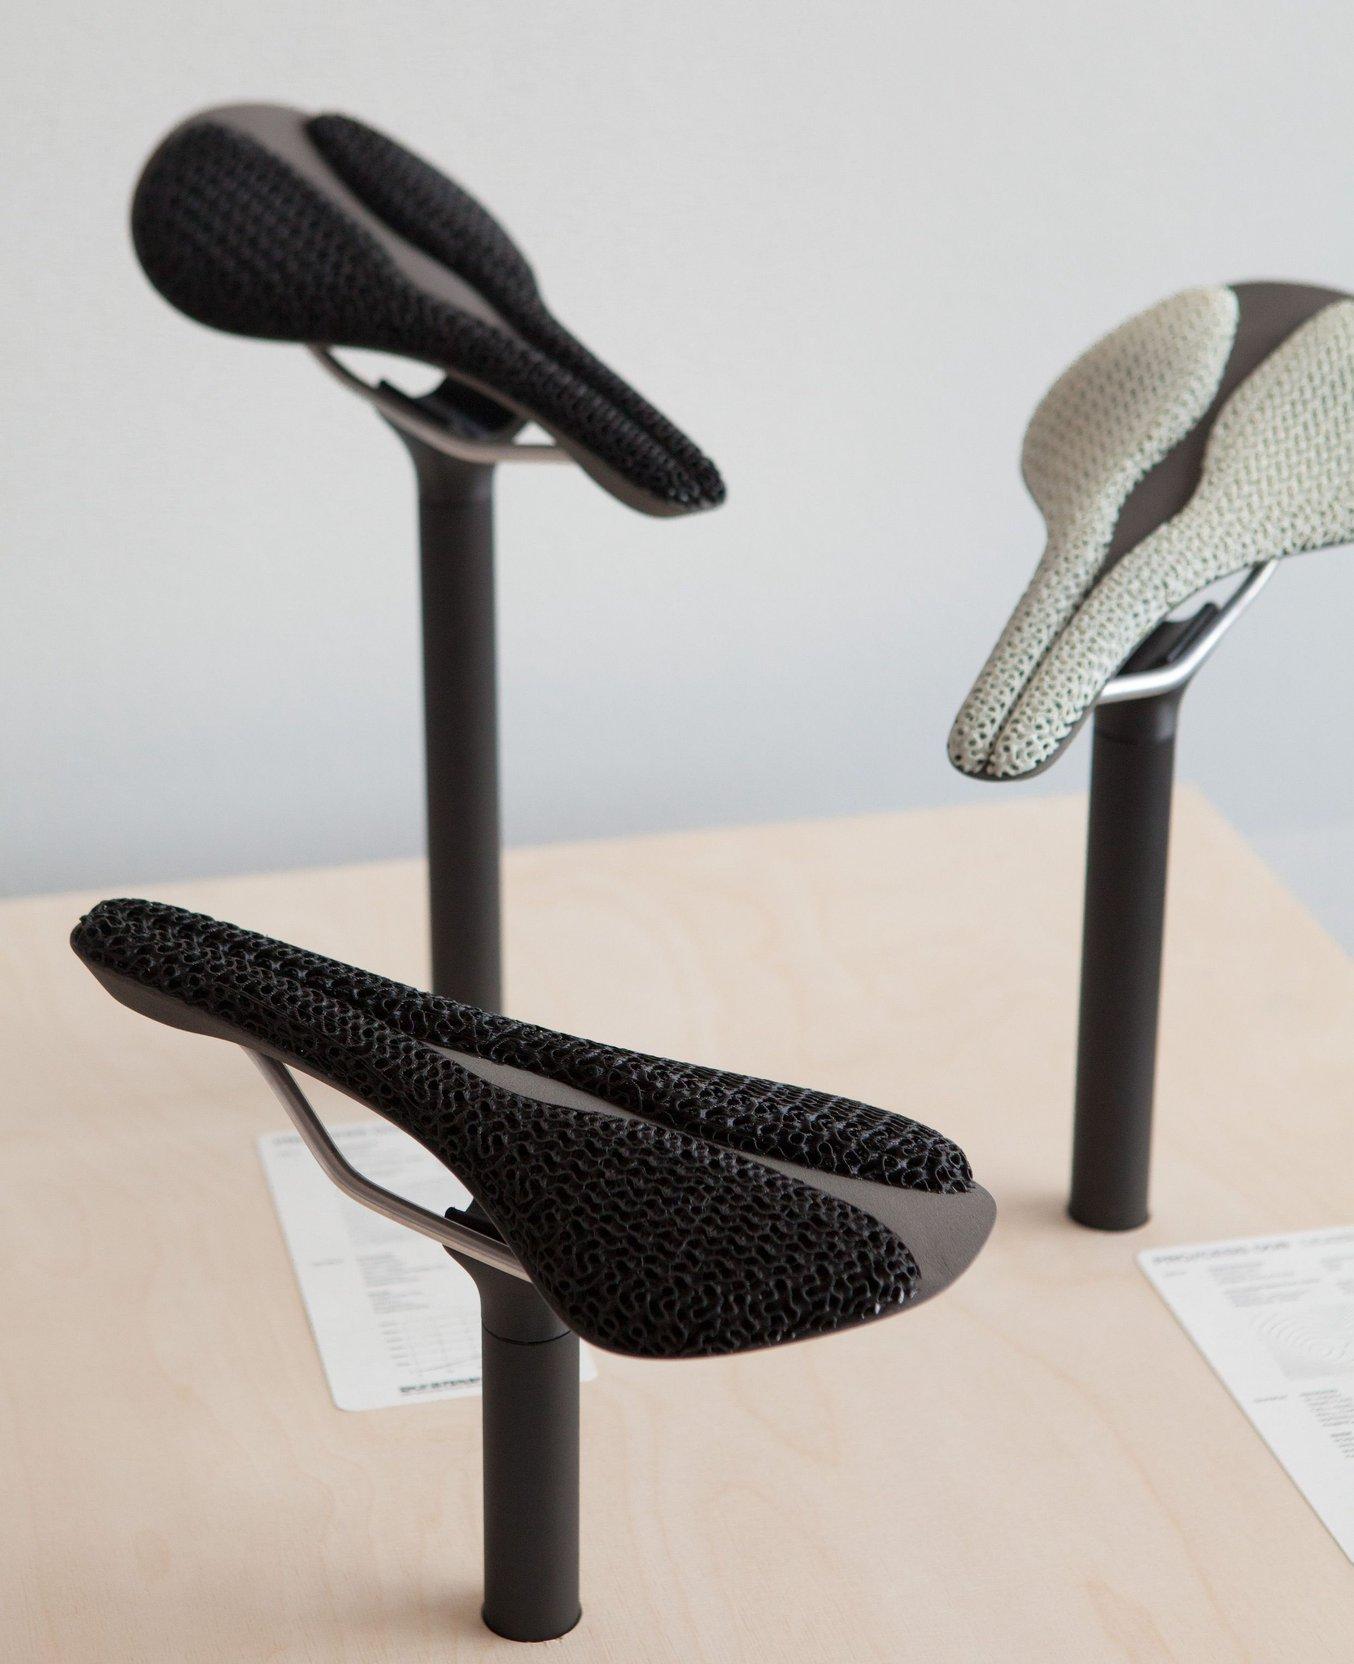 At the end of his bachelor's thesis, Tim Schütze had three gender-sensitive, individualized and ready-to-use bicycle saddles and an open-source process.